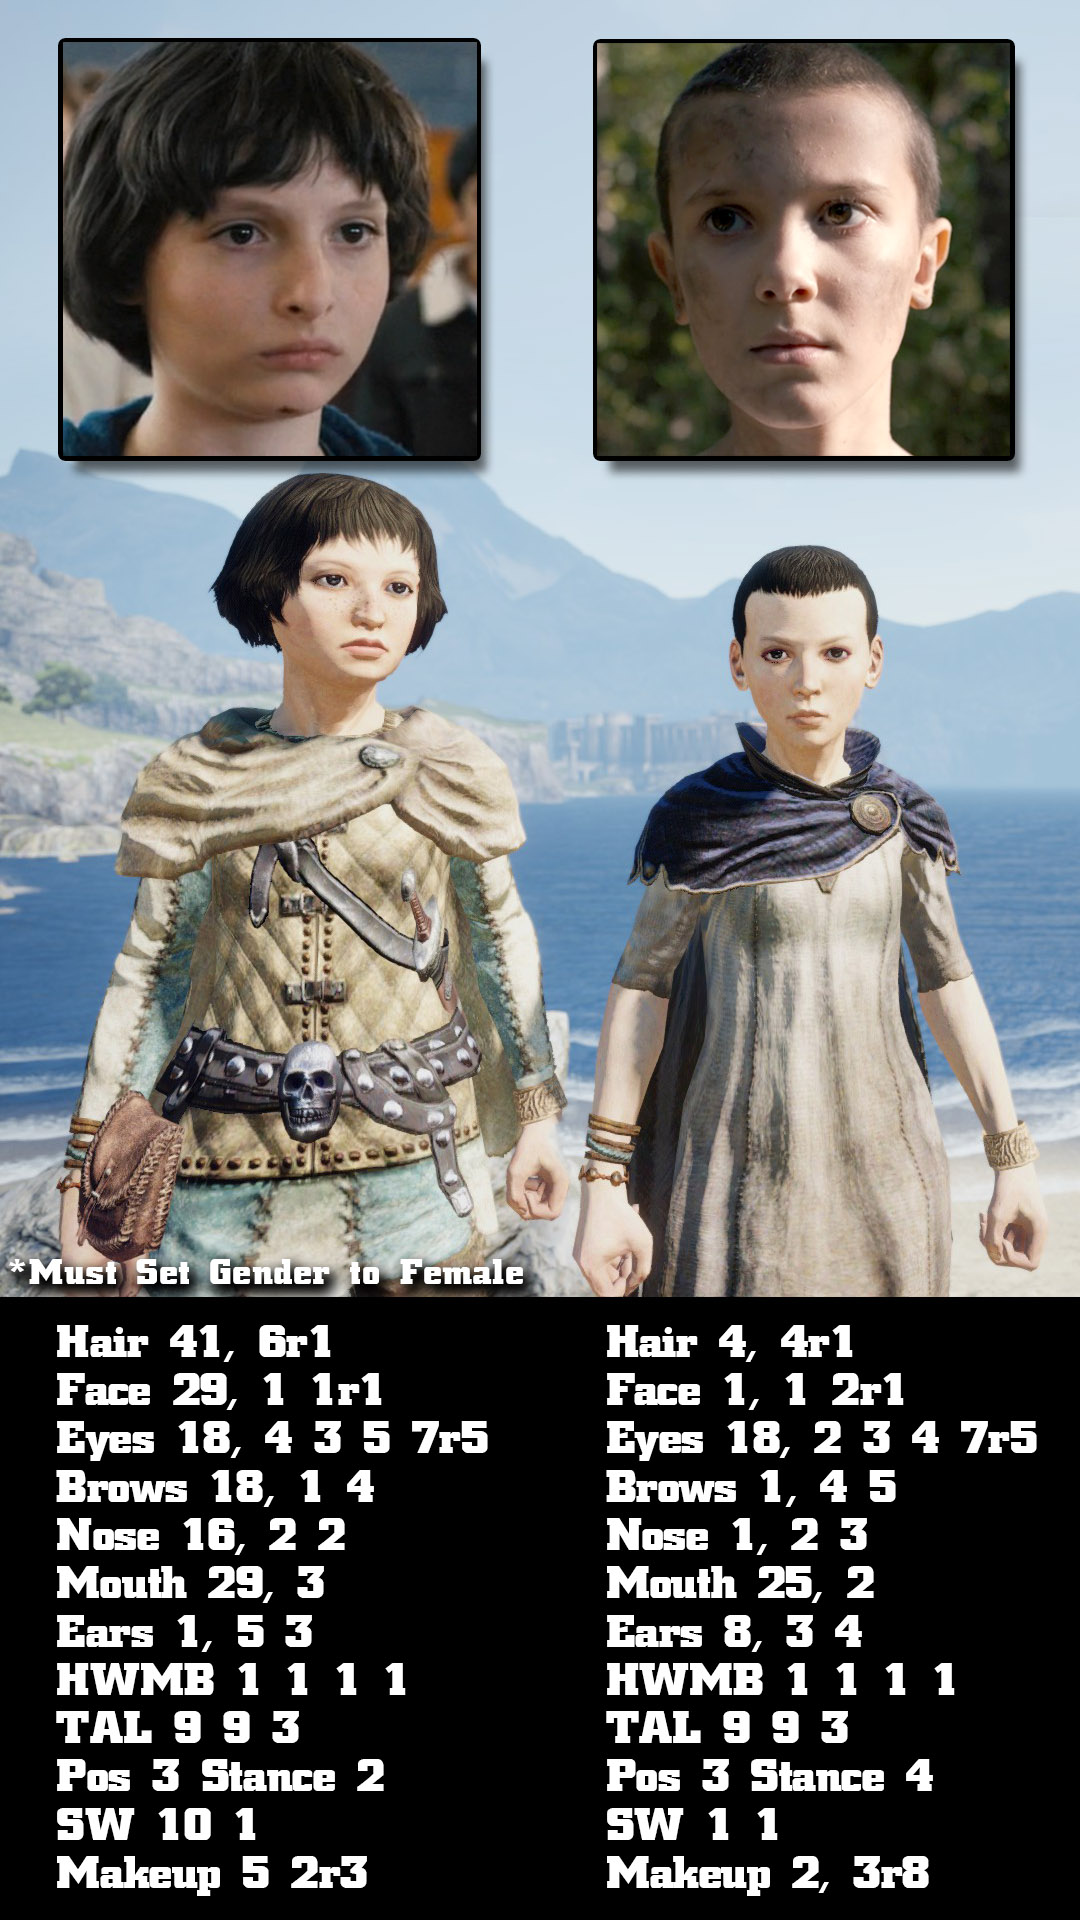 Dragon Dogma Dark Arisen - dragon's dogma character creation - caused Must Set Gender to Female Hair 41, 6r1 Face 29, 1 1r1 Eyes 18, 4 3 5 7r5 Brows 18, 14 Nose 16, 22 Mouth 29, 3 Ears 1, 5 3 Hwmb 1 1 1 1 Tal 9 9 3 Pos 3 Stance 2 Sw 10 1 Makeup 5 2r3 Hair